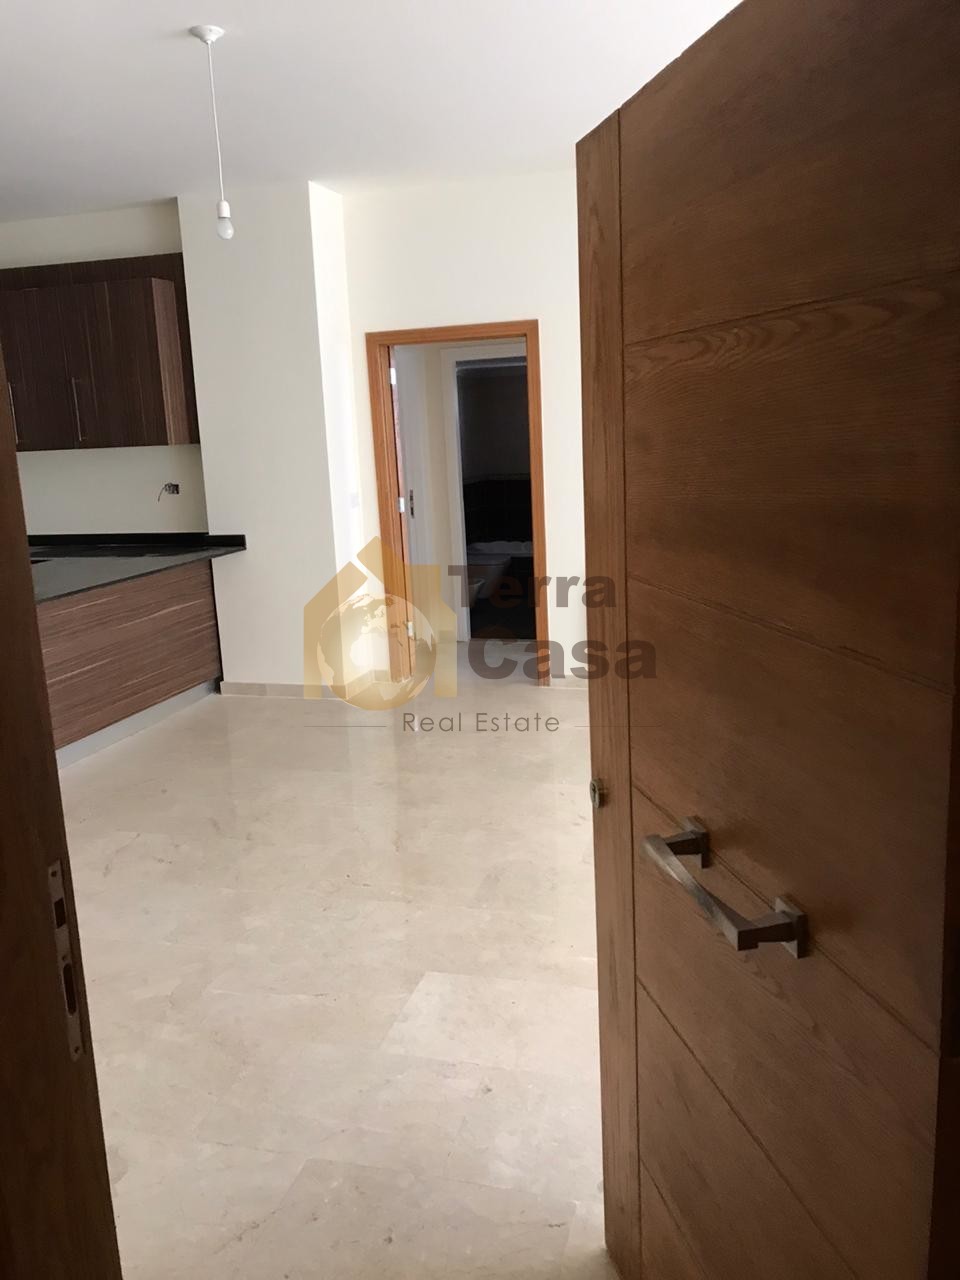 Luxurious brand new apartment cash payment.Ref# 2520